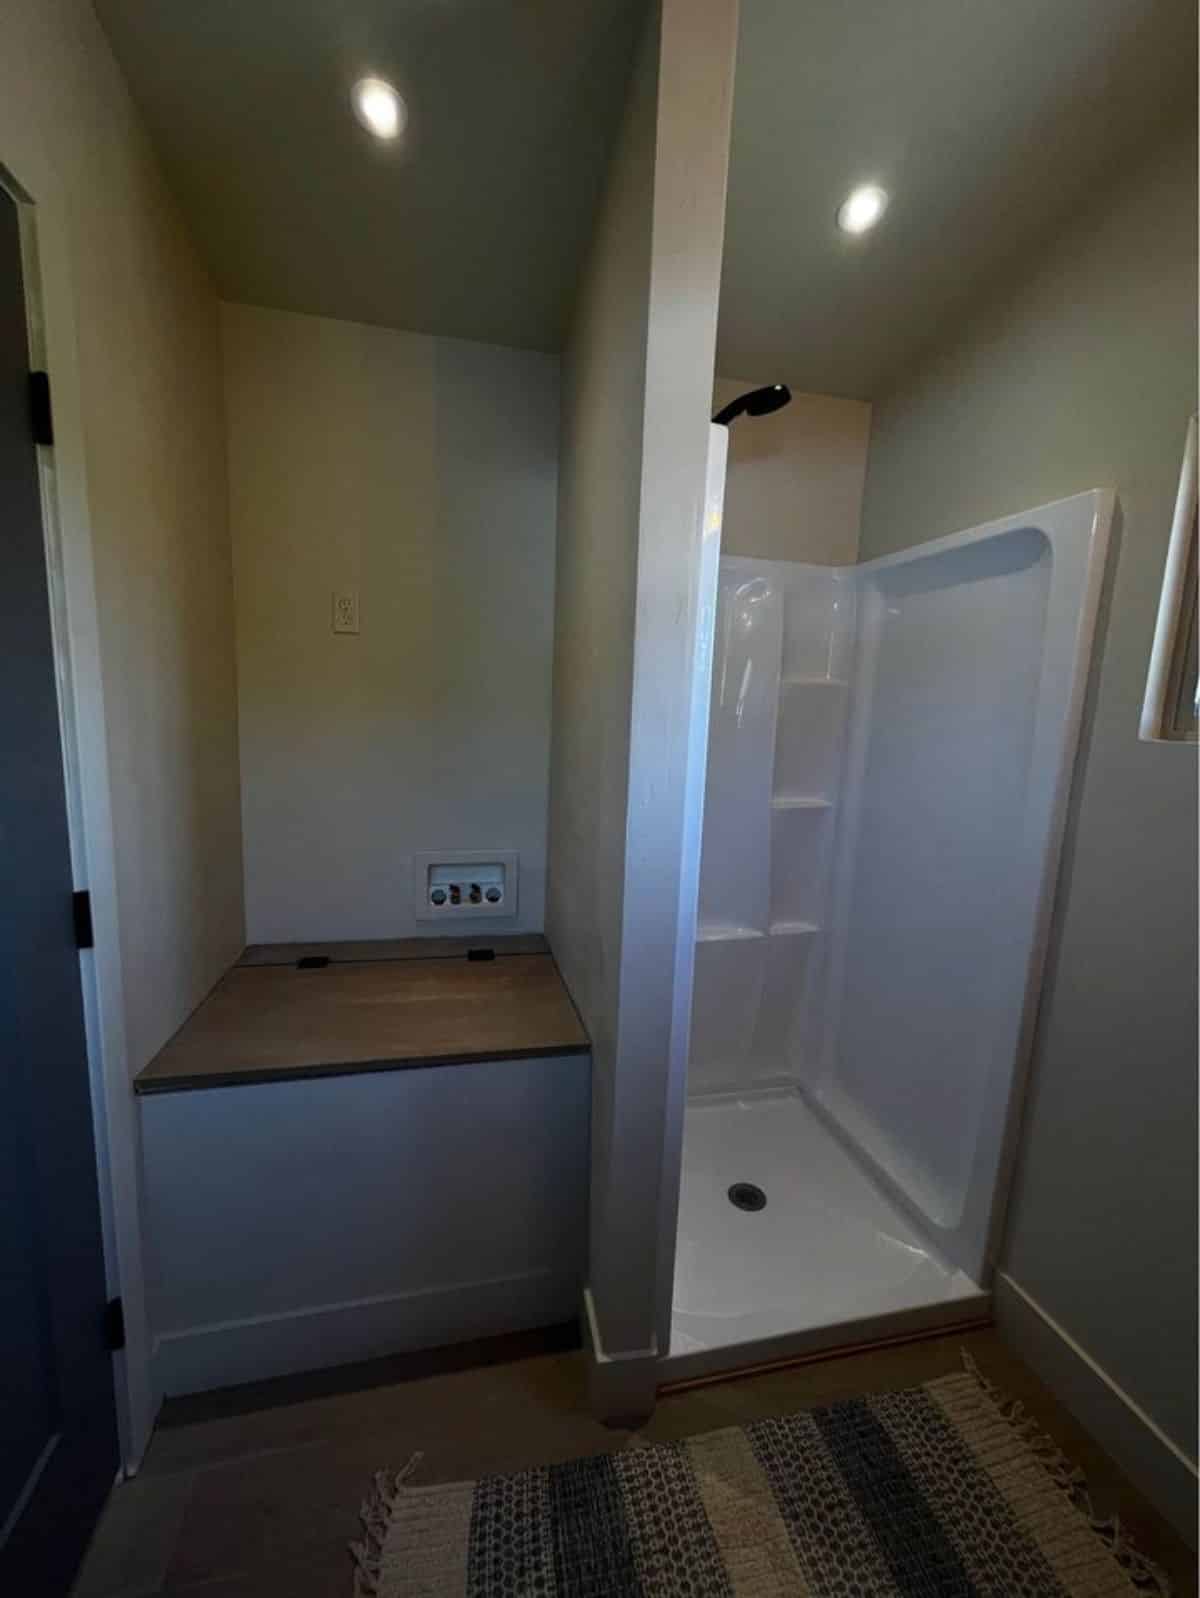 Bathroom of newly constructed 30’ tiny home has a separate shower area with space for washer dryer combo